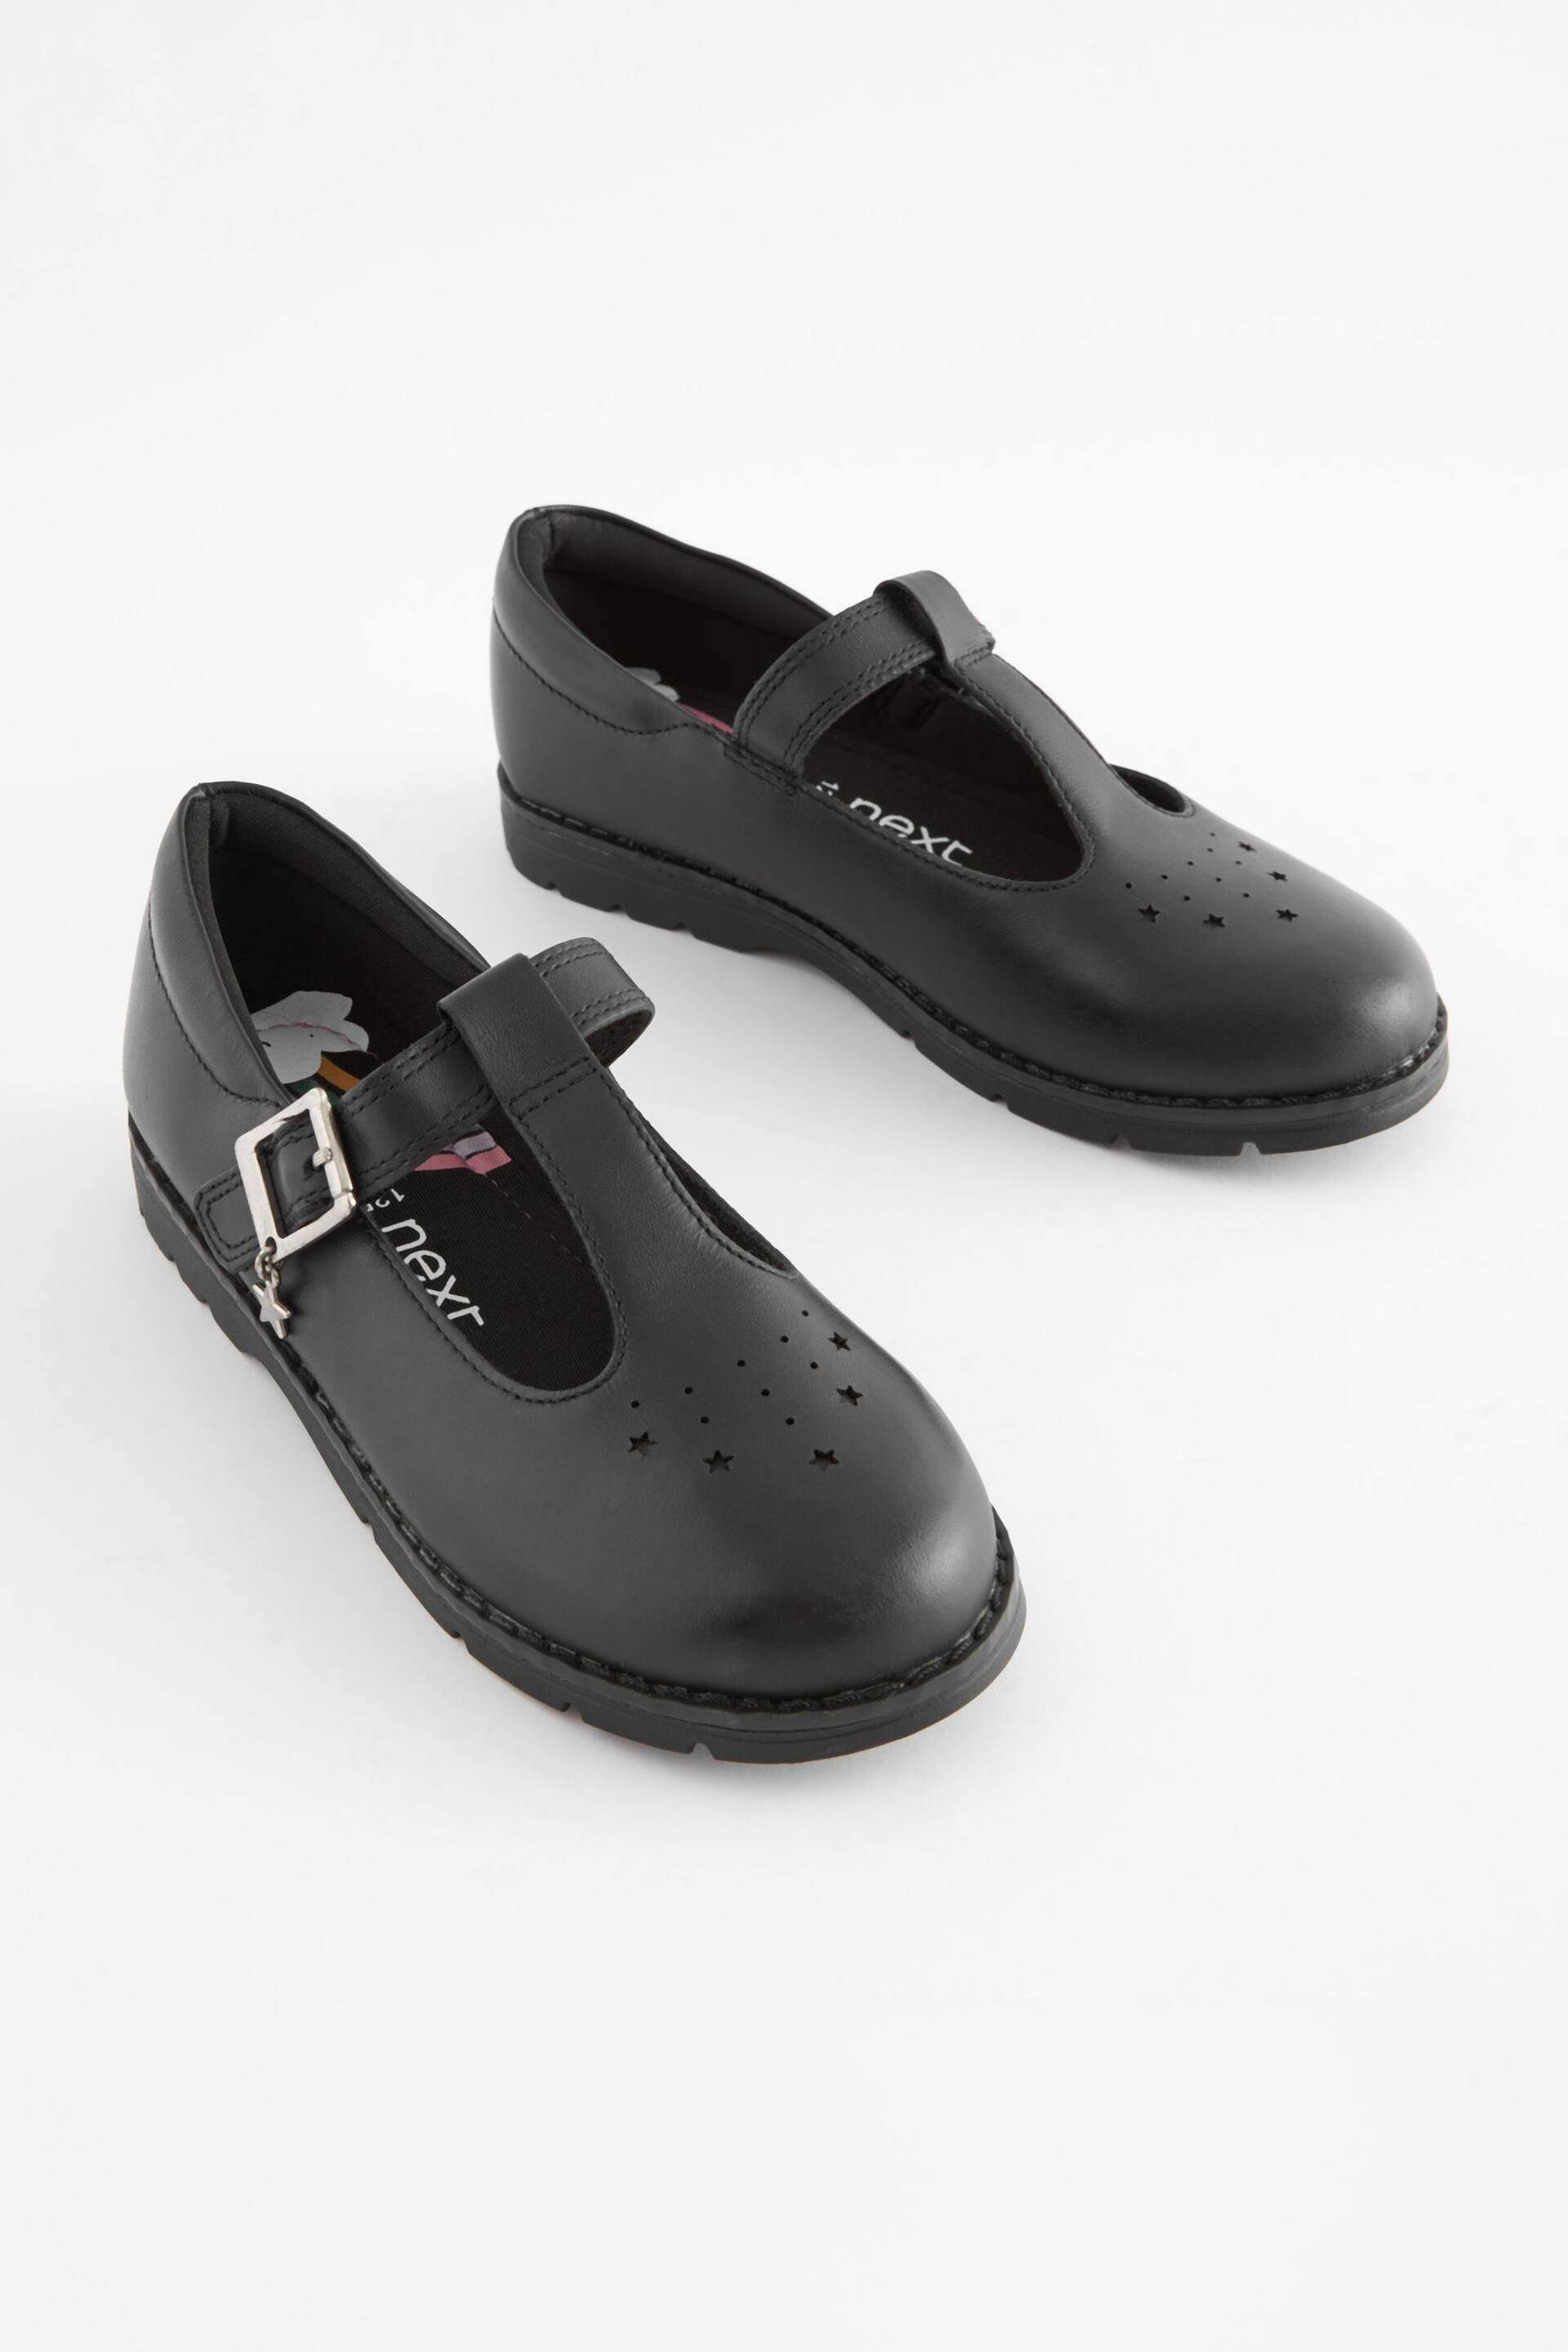 Black Wide Fit (G) Leather Junior T-Bar School Shoes - Image 1 of 5